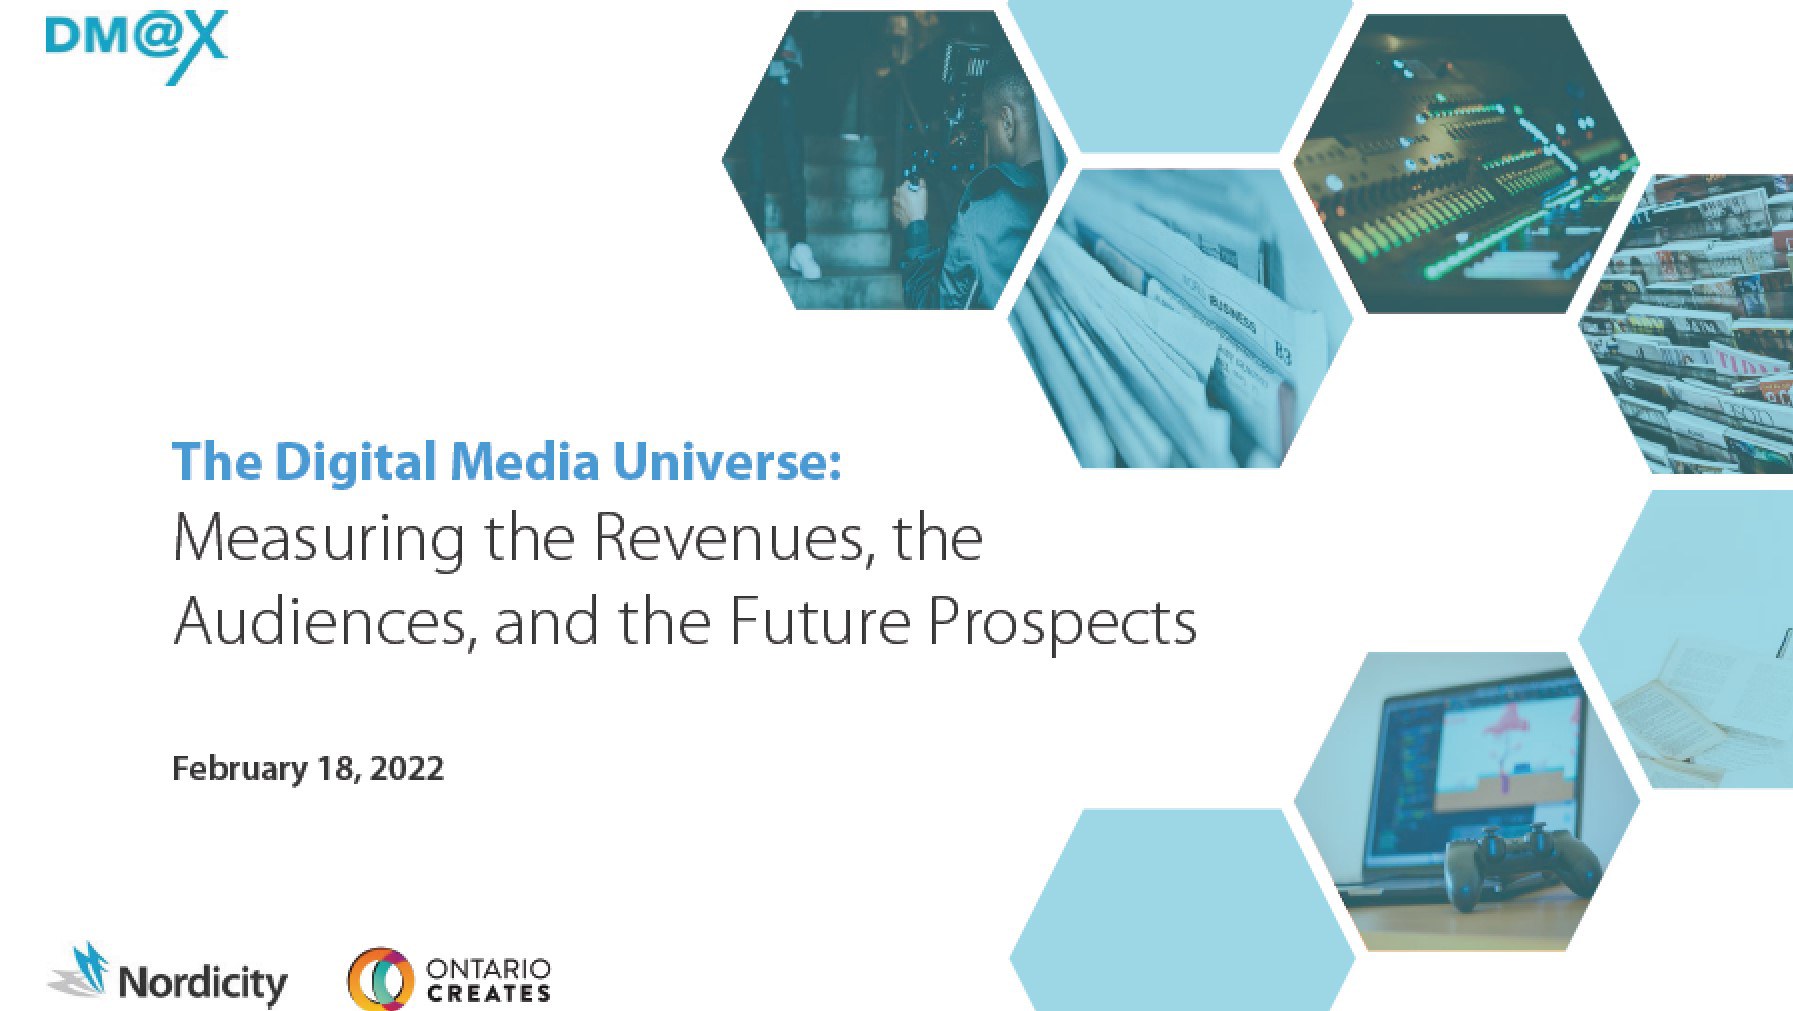 The Digital Media Universe: Measuring the Revenues, Audiences and the Future Prospects